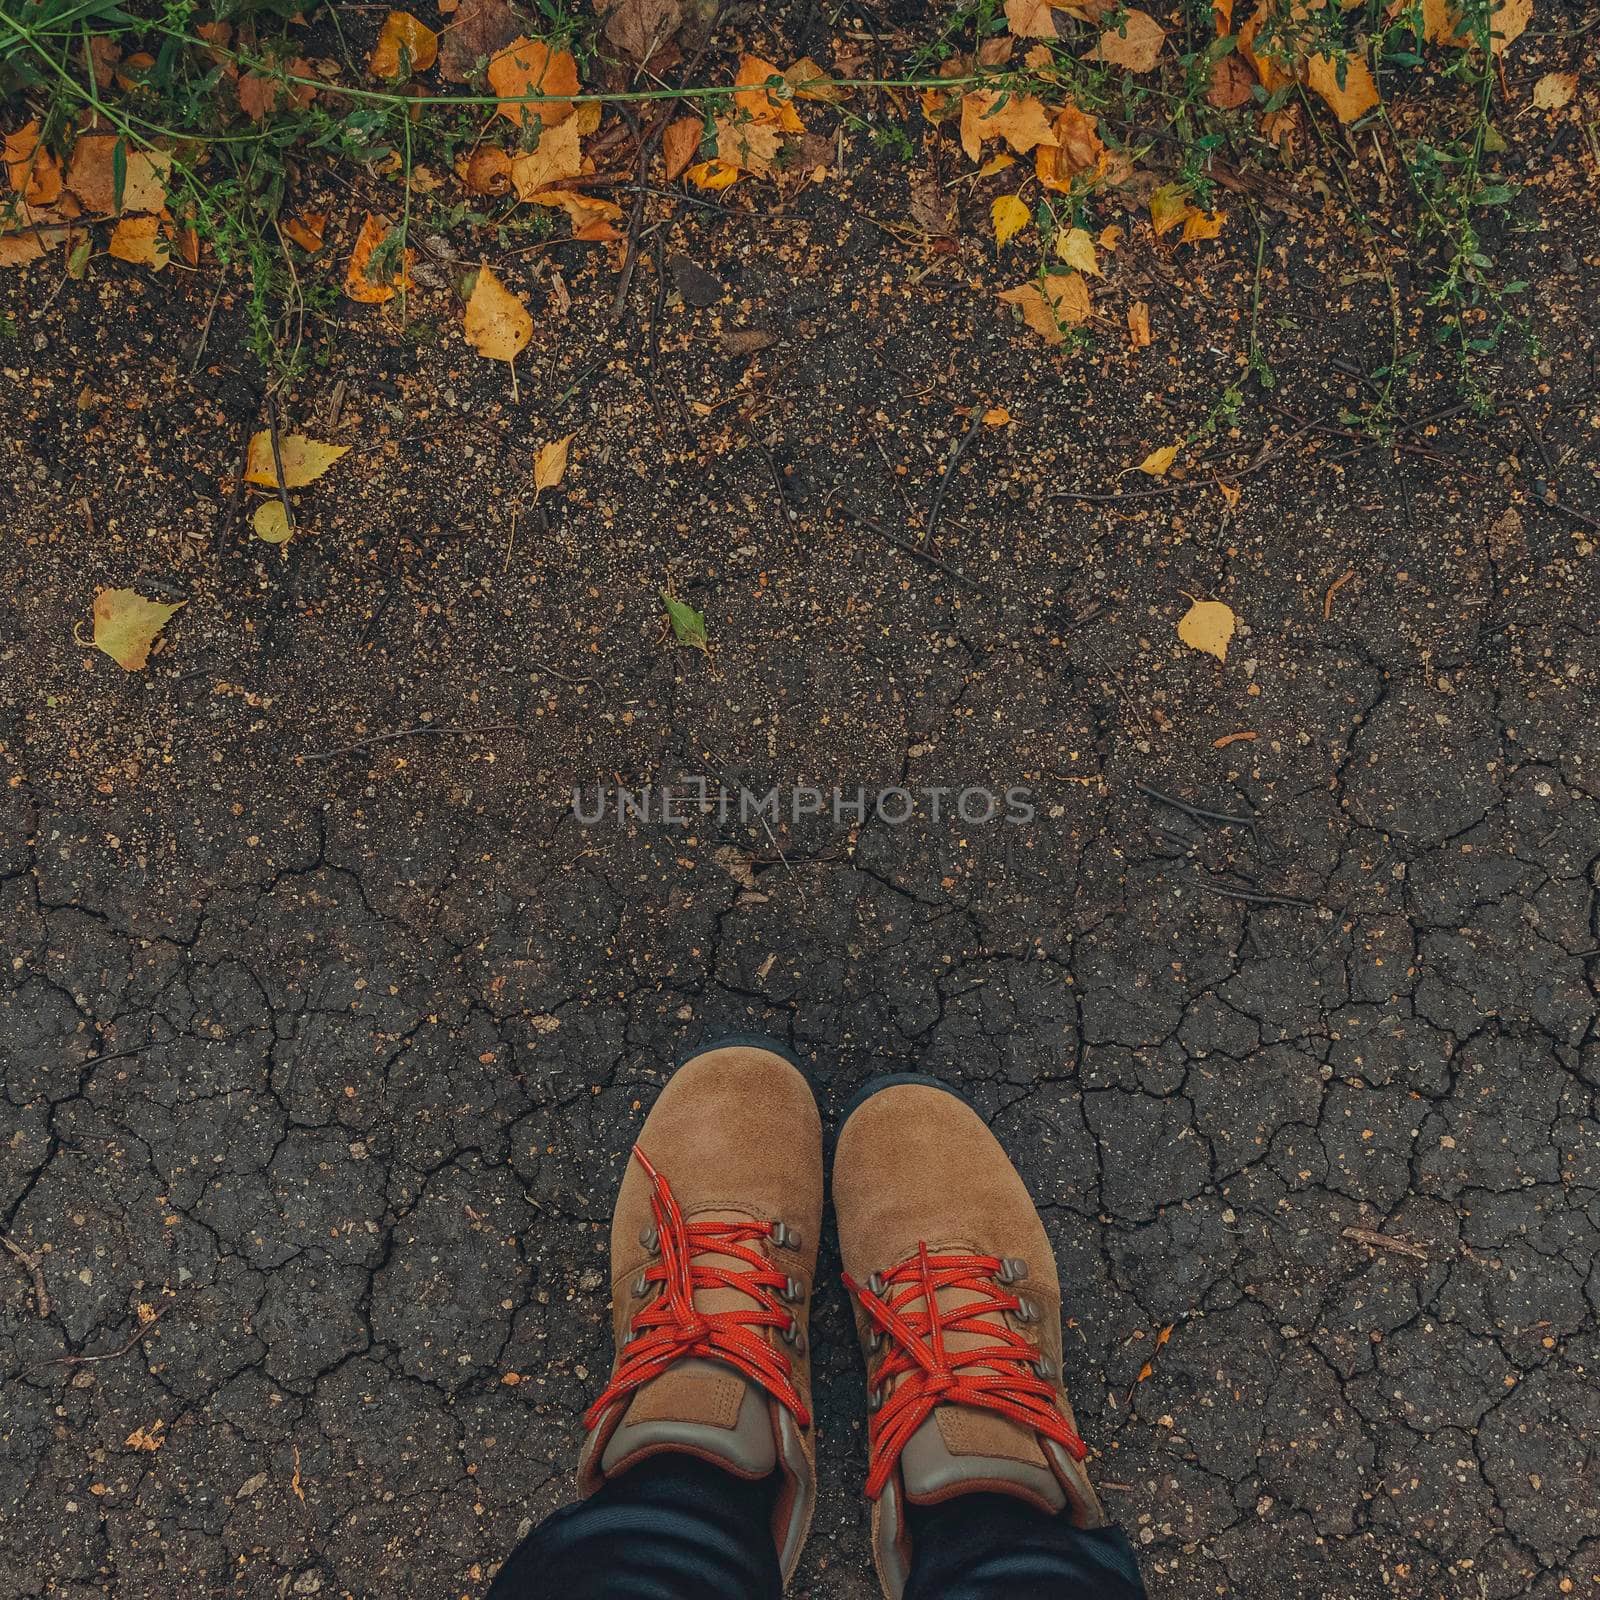 square image feet in brown boots on the cracked ground with yellow fallen leaves. Autumn background. lifestyle concept. copy space